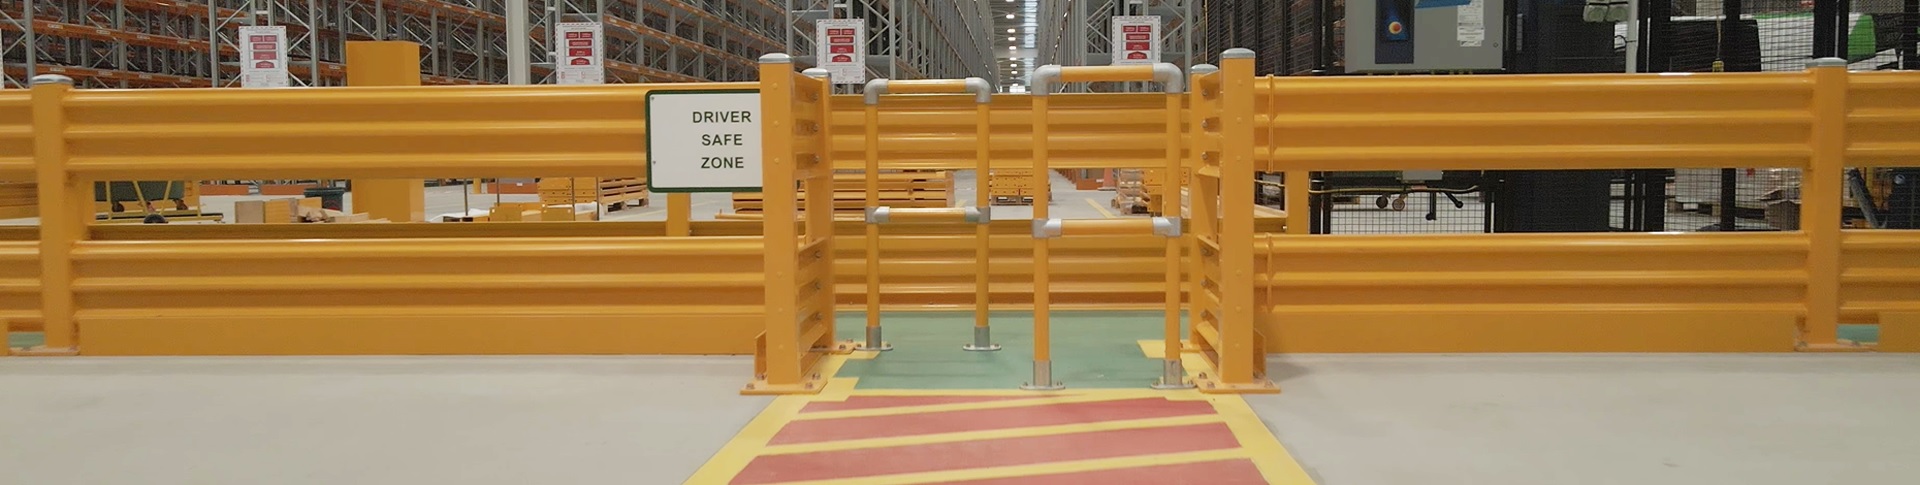 Woolworths Distribution Centre Case Study | Safety Barriers logo